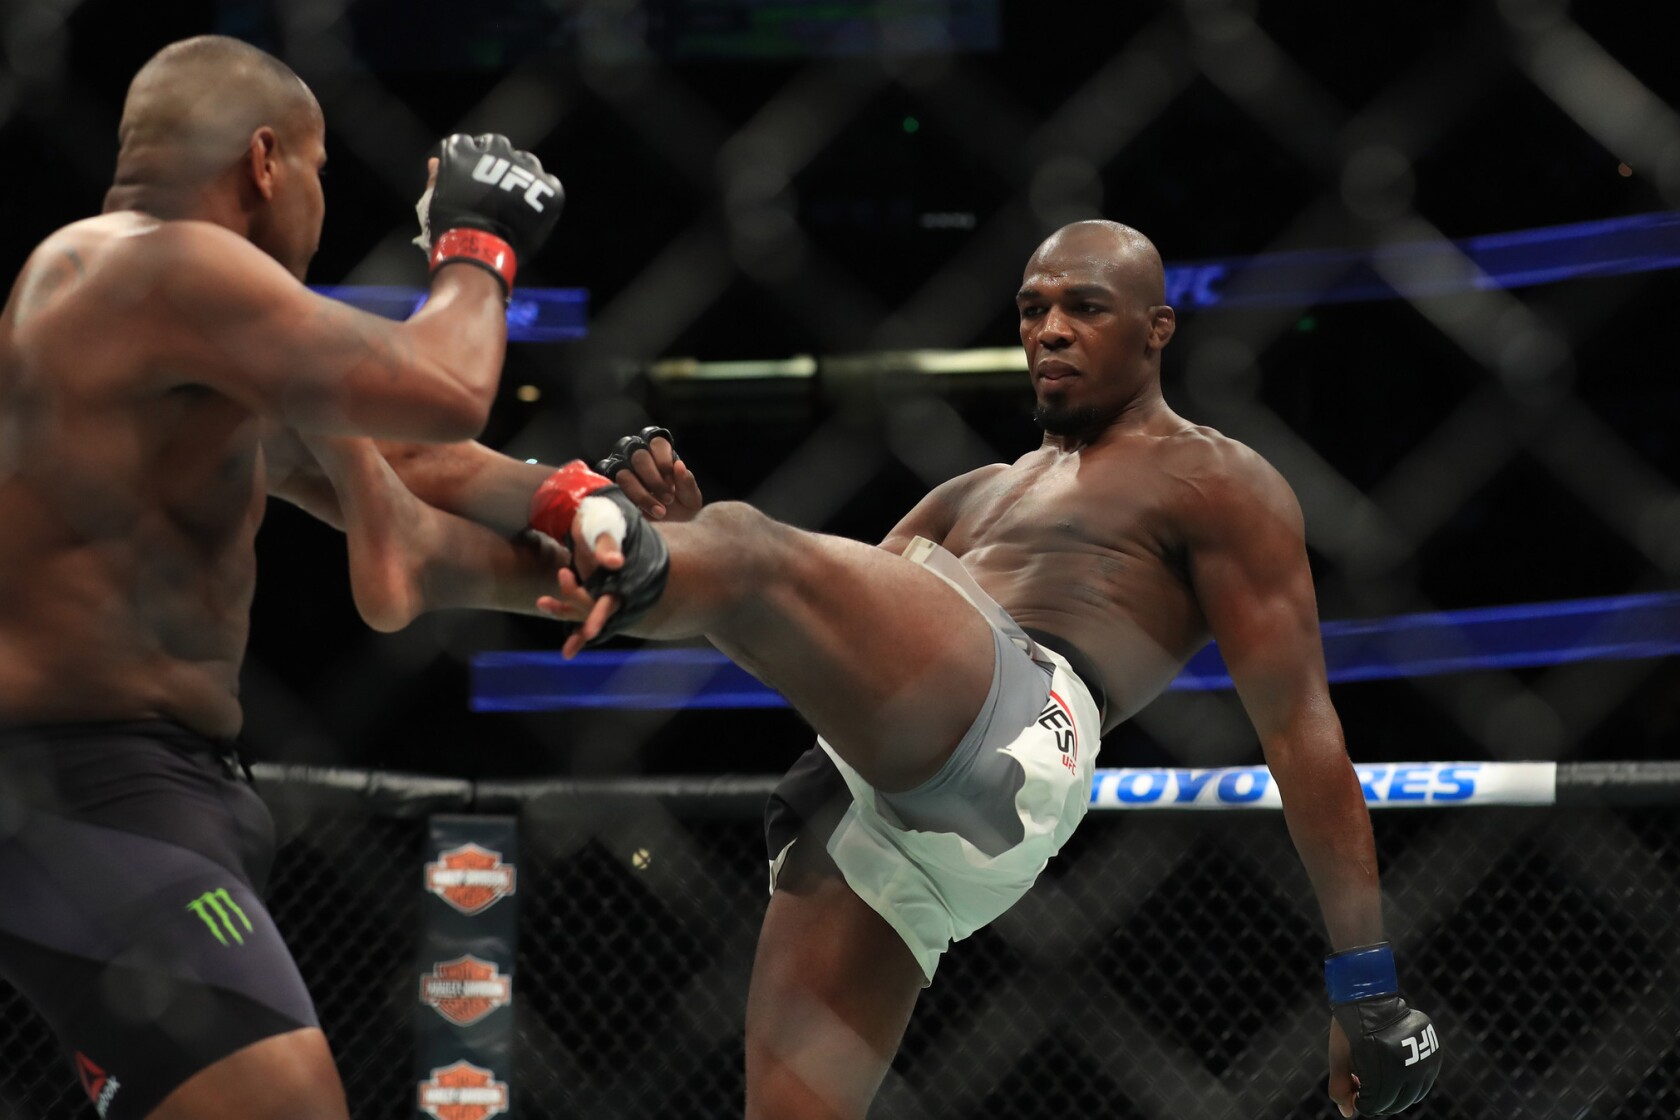 UFC champion Jon Jones takes care of business, in and out of octagon ...